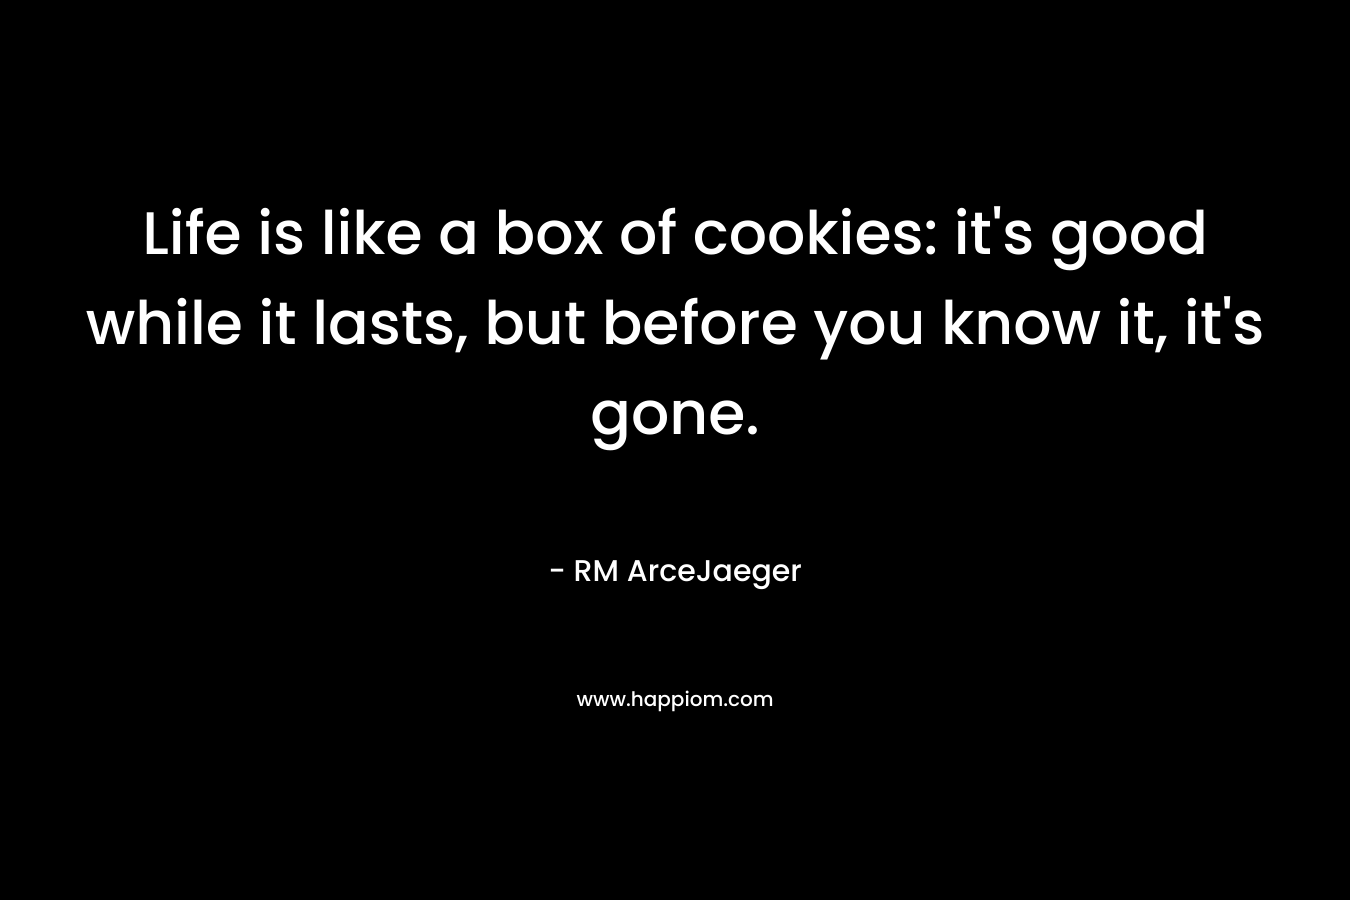 Life is like a box of cookies: it's good while it lasts, but before you know it, it's gone.